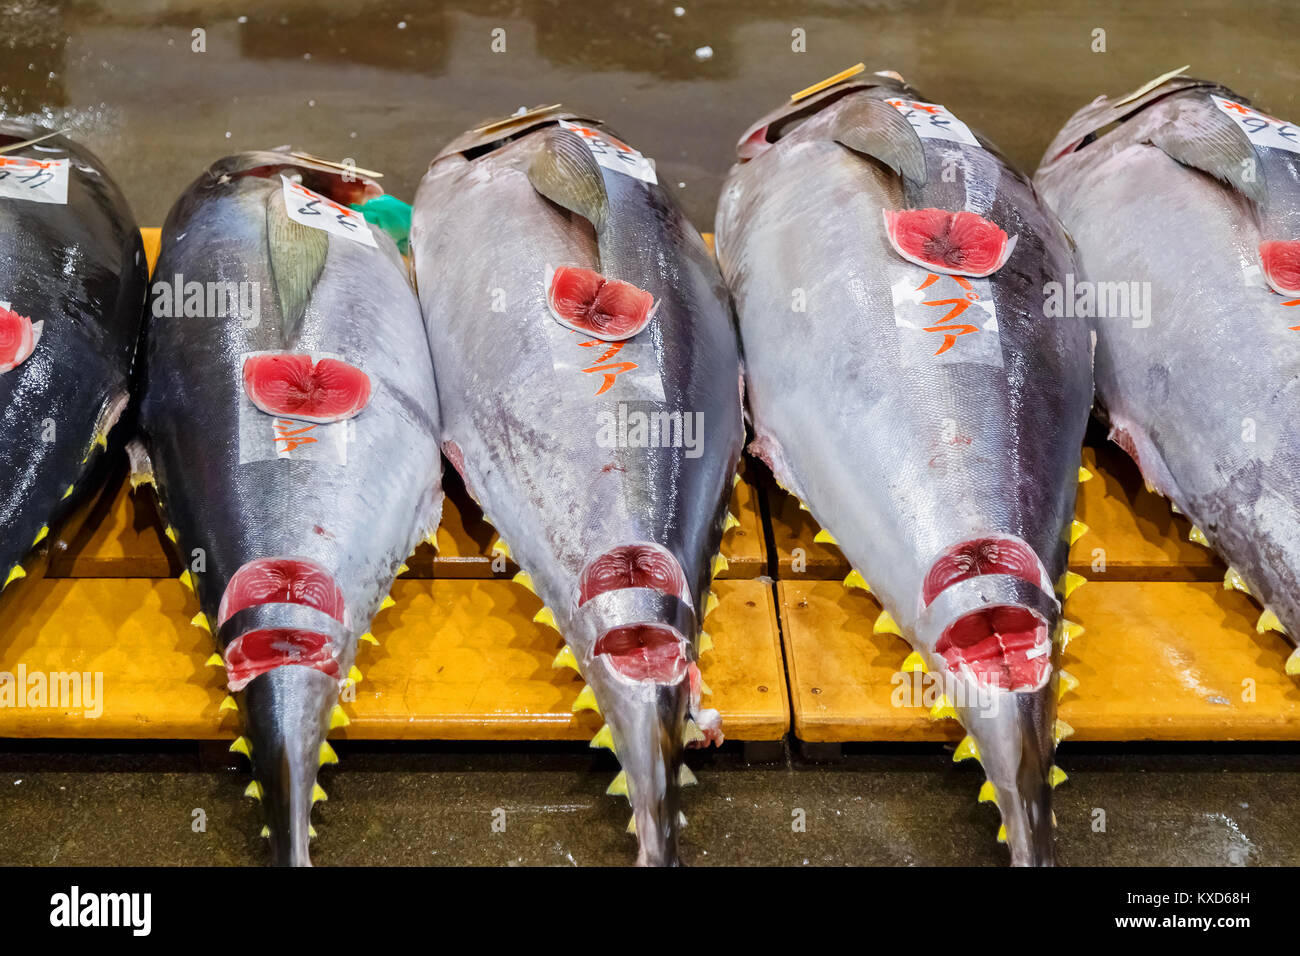 Tuna put for auction at Osaka Central Wholesale Market                                                 OSAKA, JAPAN - OCTOBER 24: Osaka Central Wholes Stock Photo